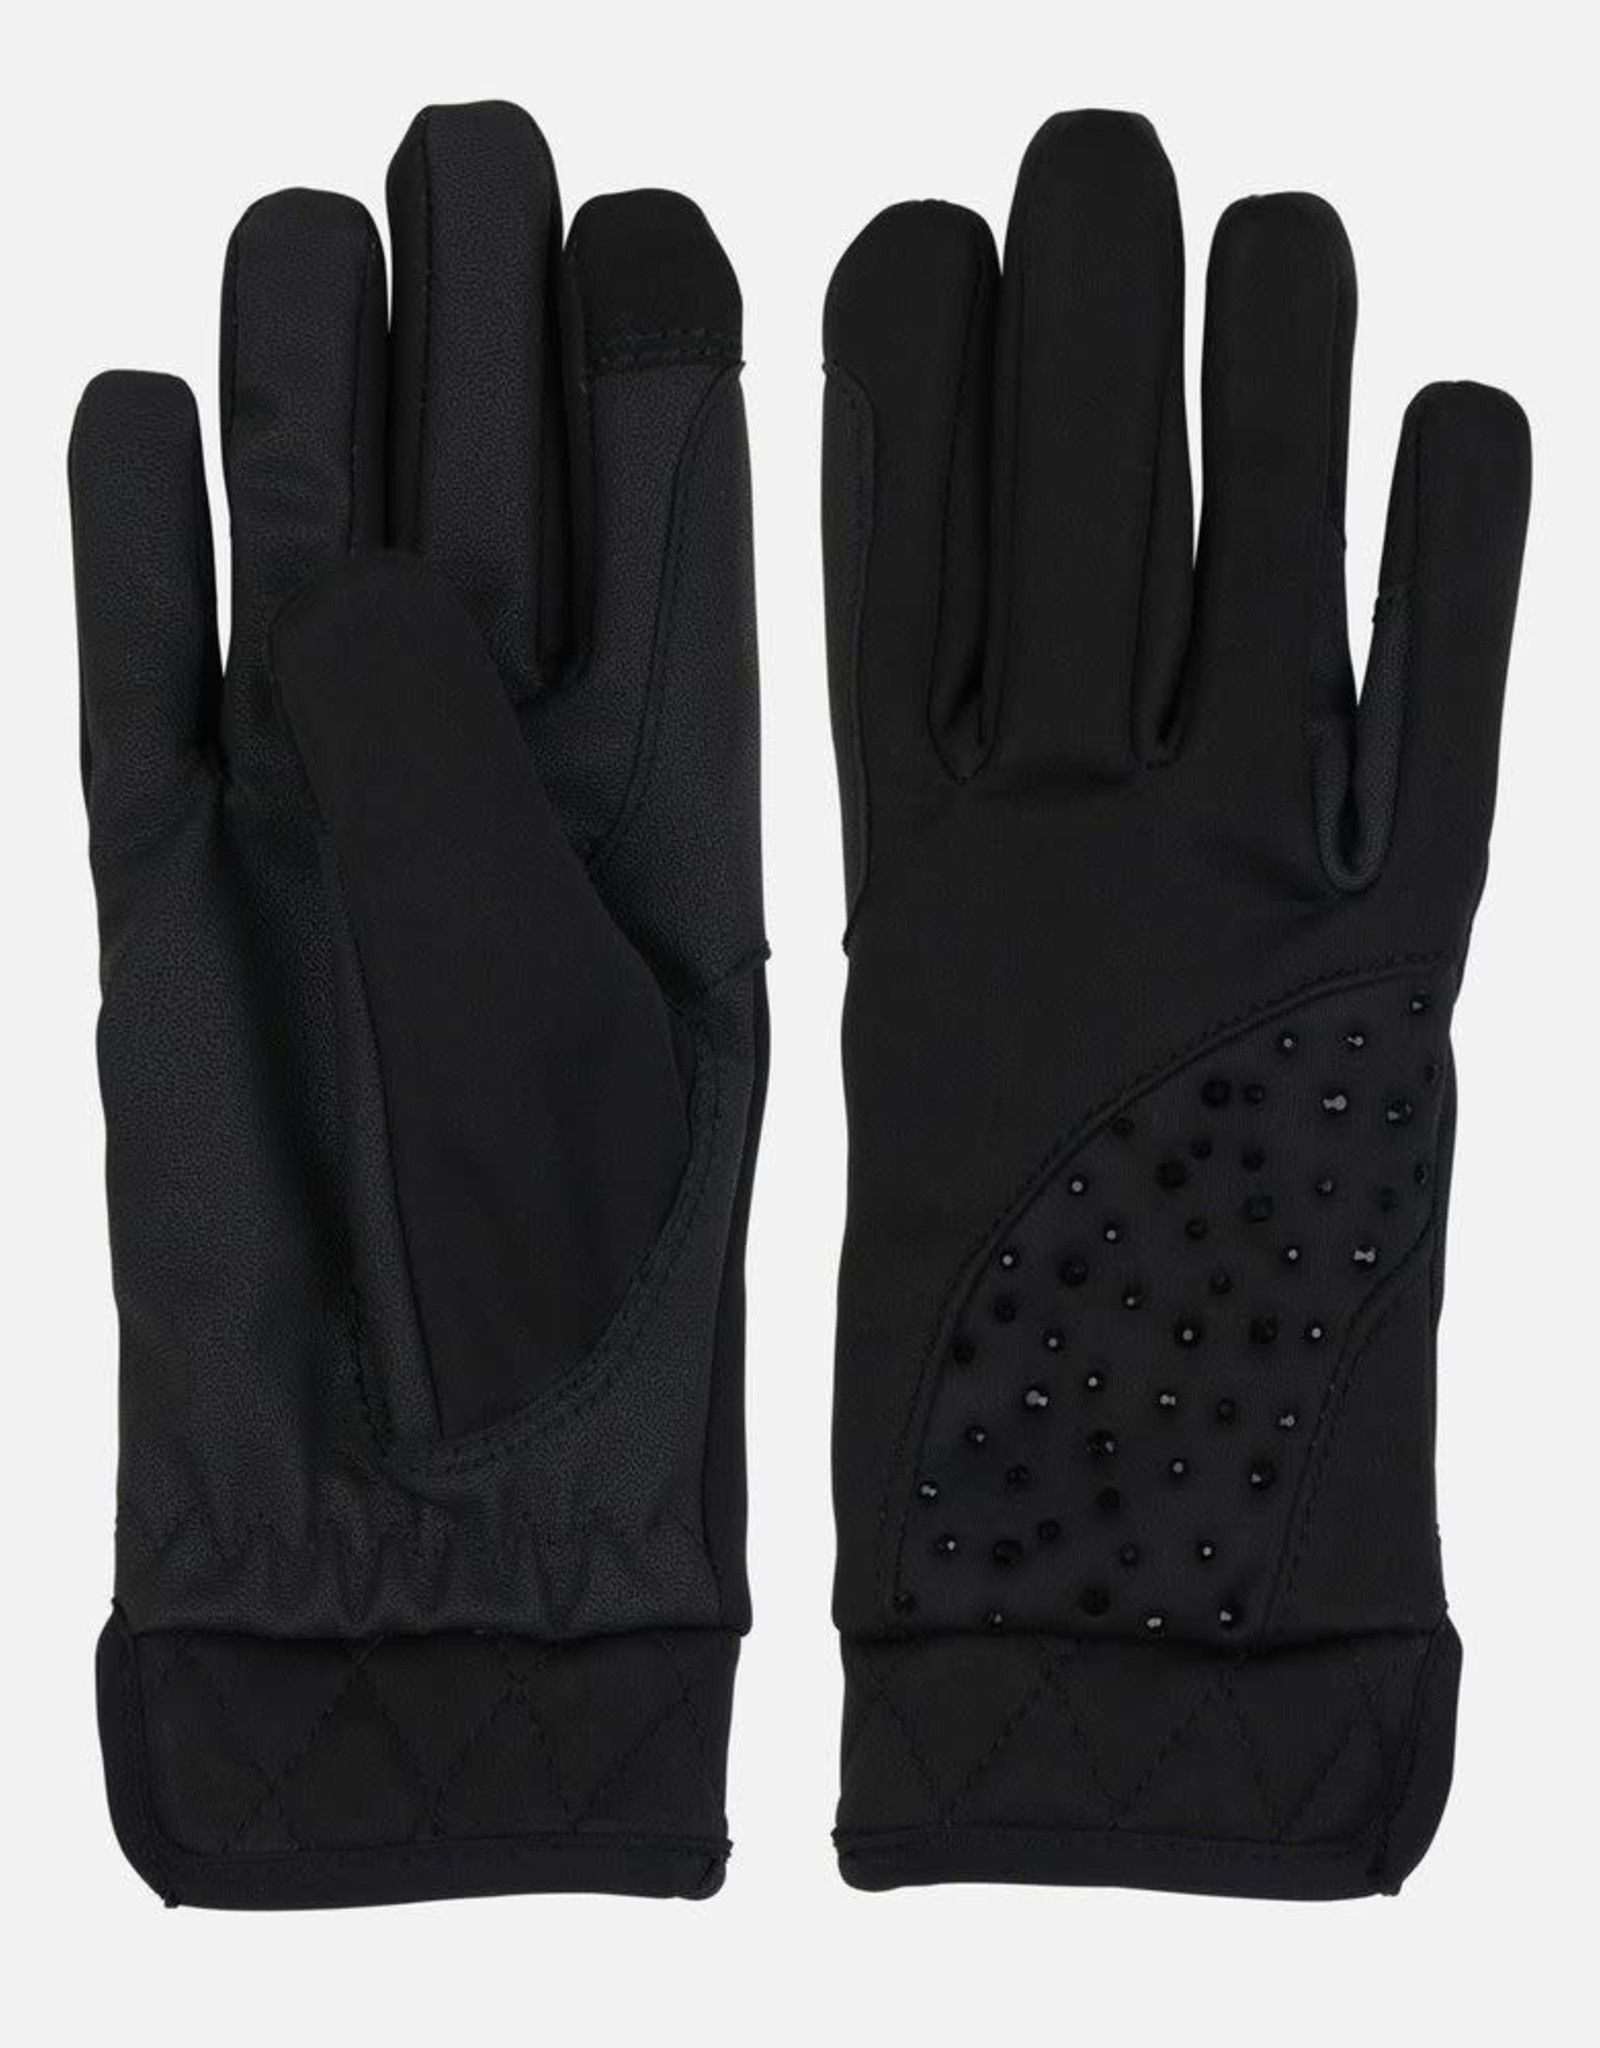 HORZE KIDS WINTER RIDING GLOVES WITH TOUCHSCREEN